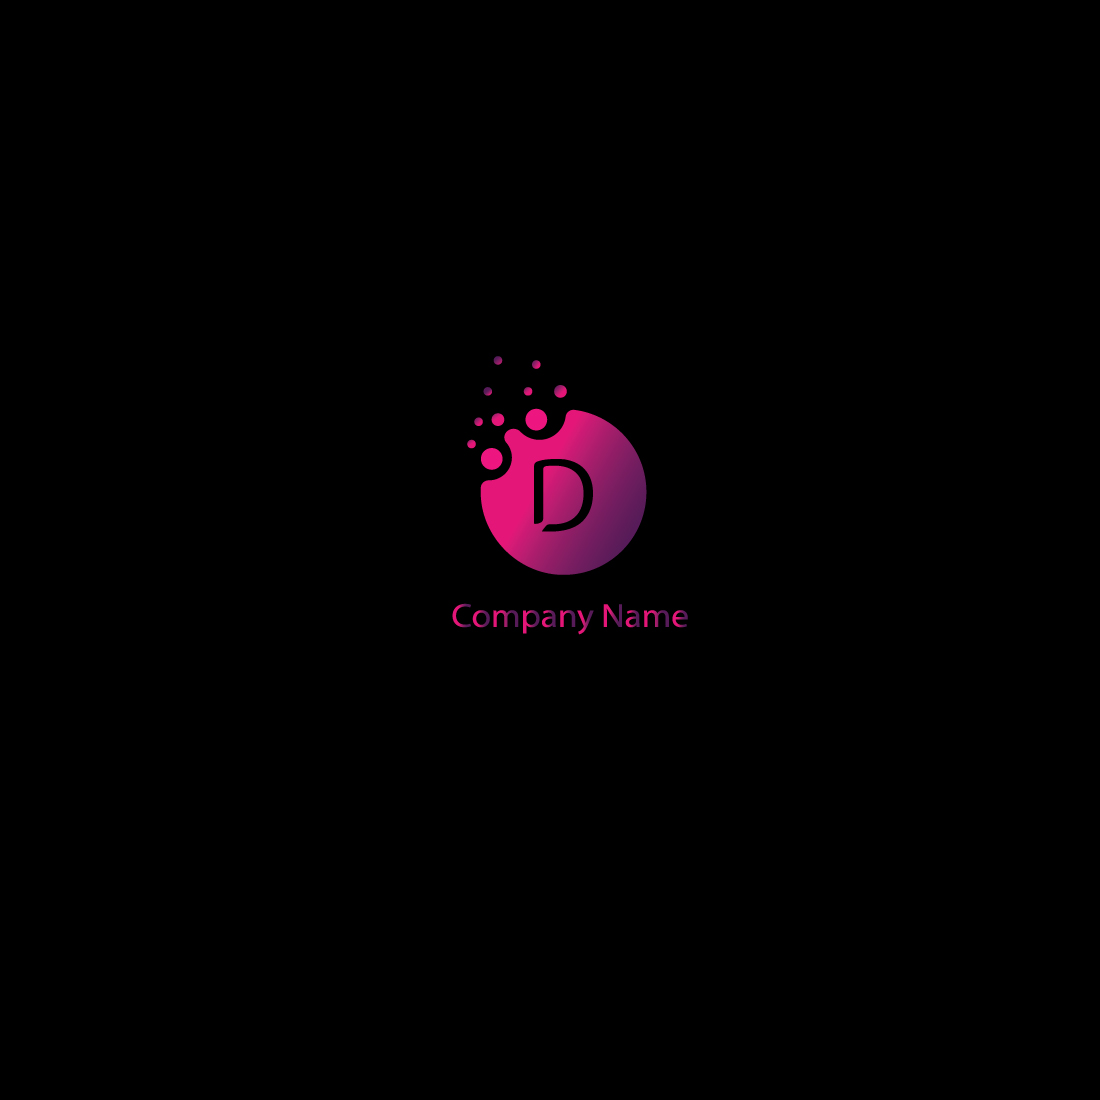 Black background with a pink and purple logo.